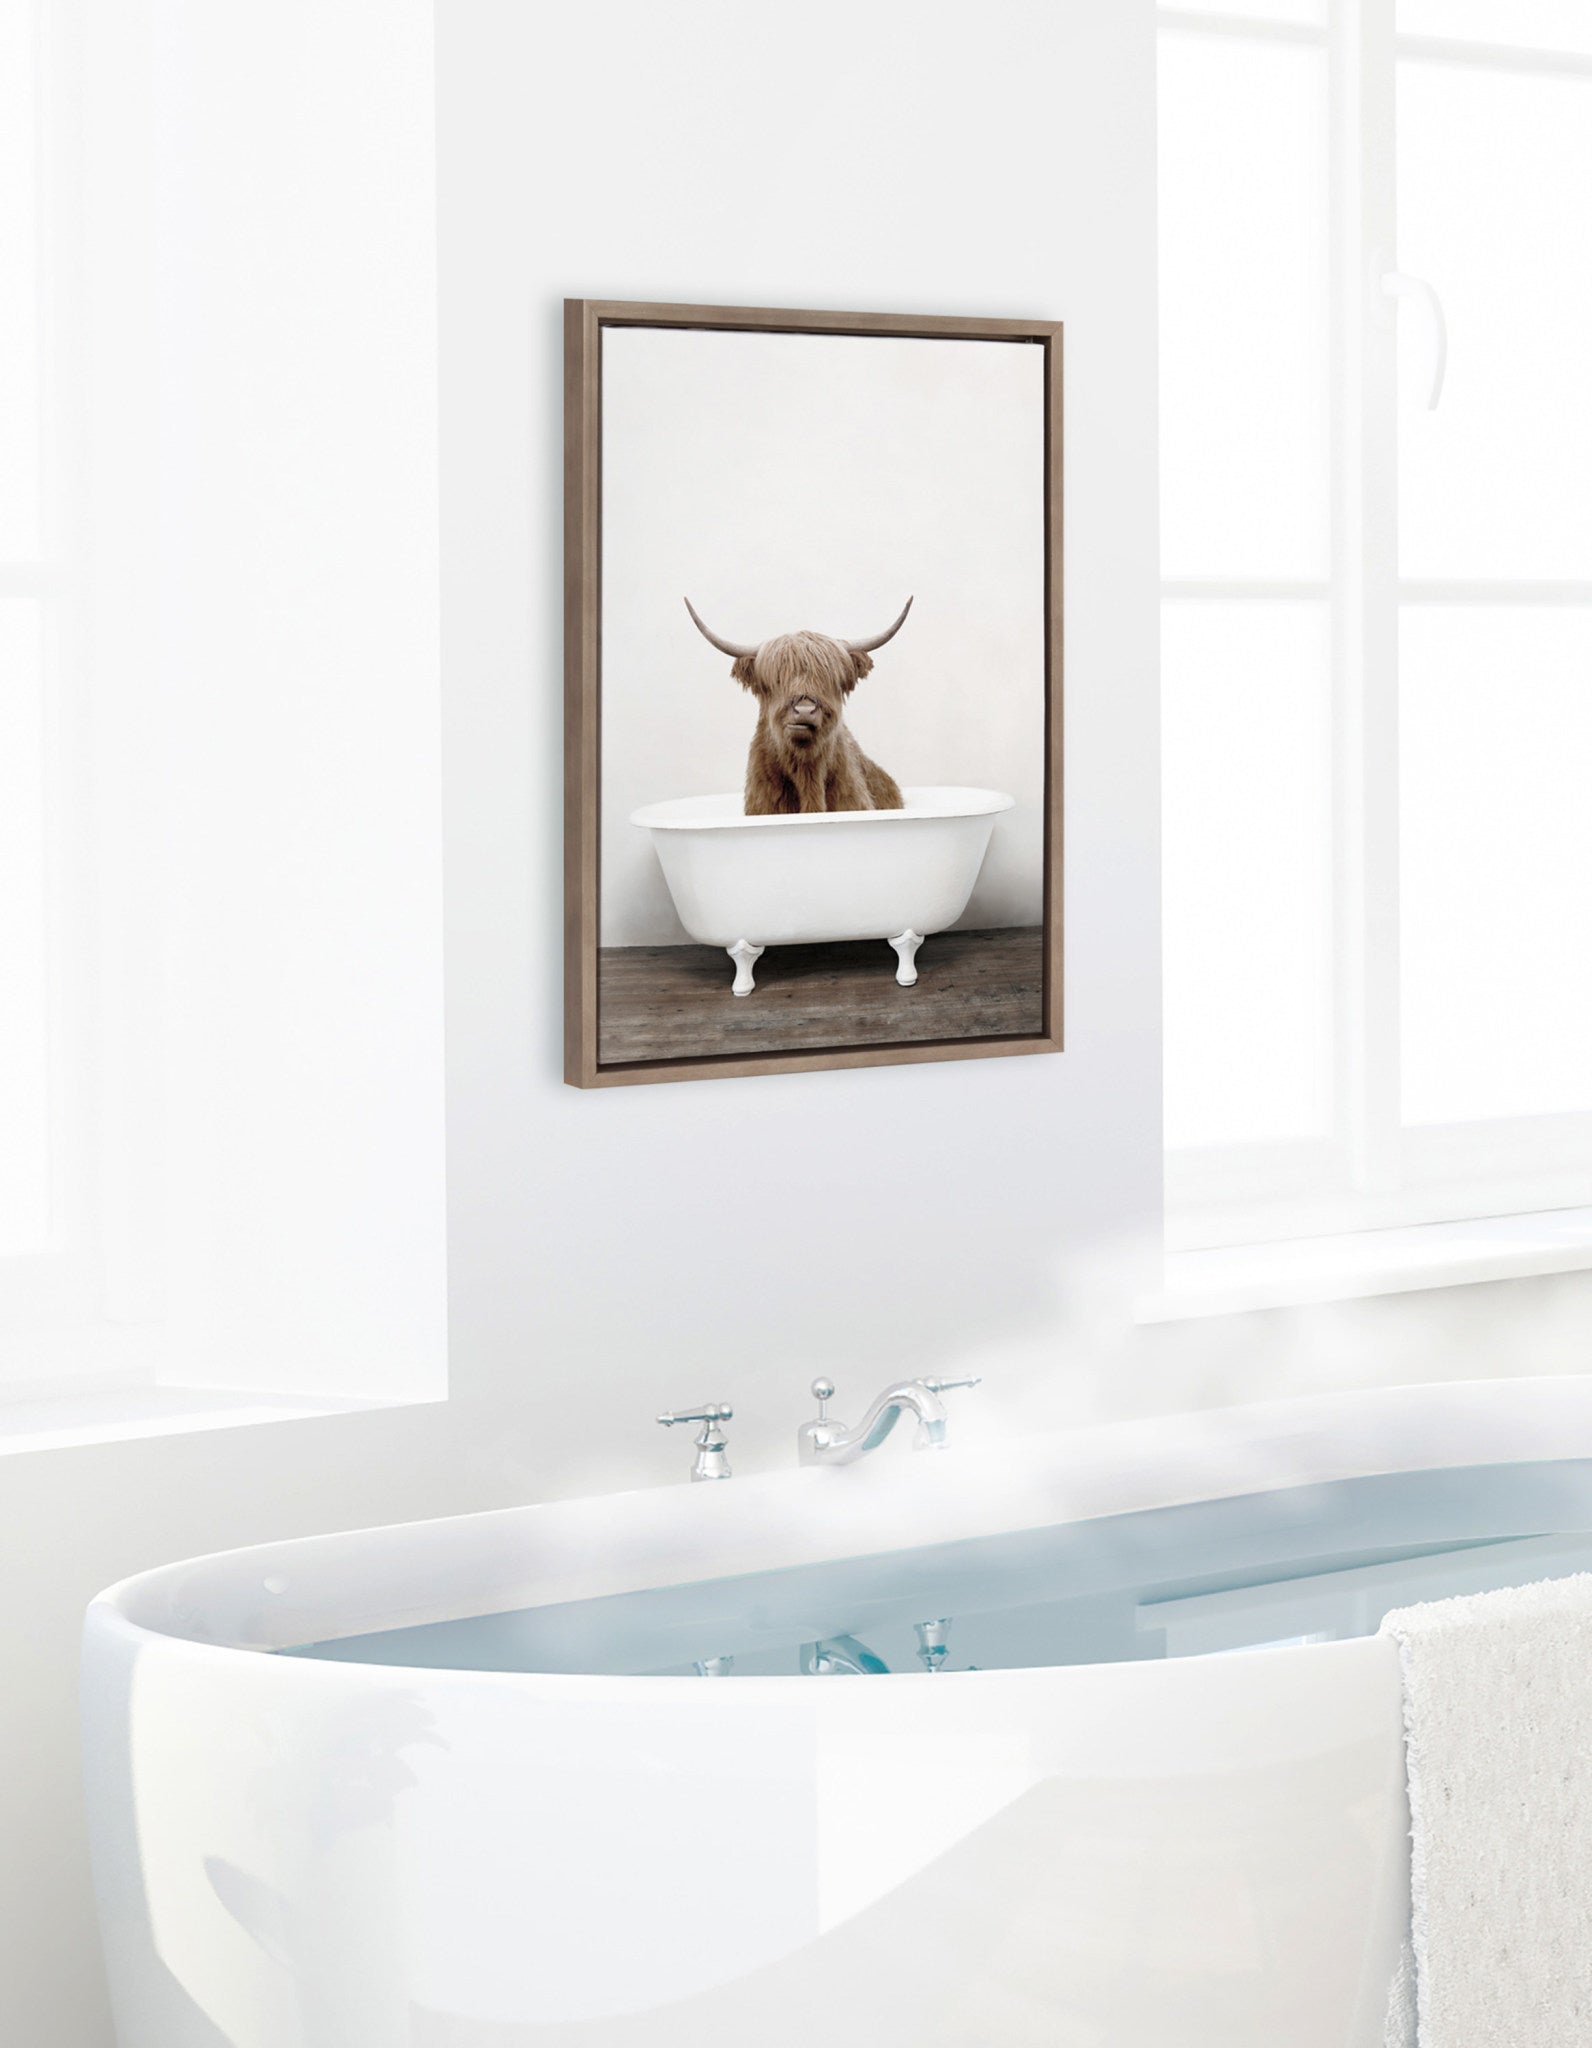 Sylvie Highland Cow in Tub Color Updated Framed Canvas by Amy Peterson Art Studio